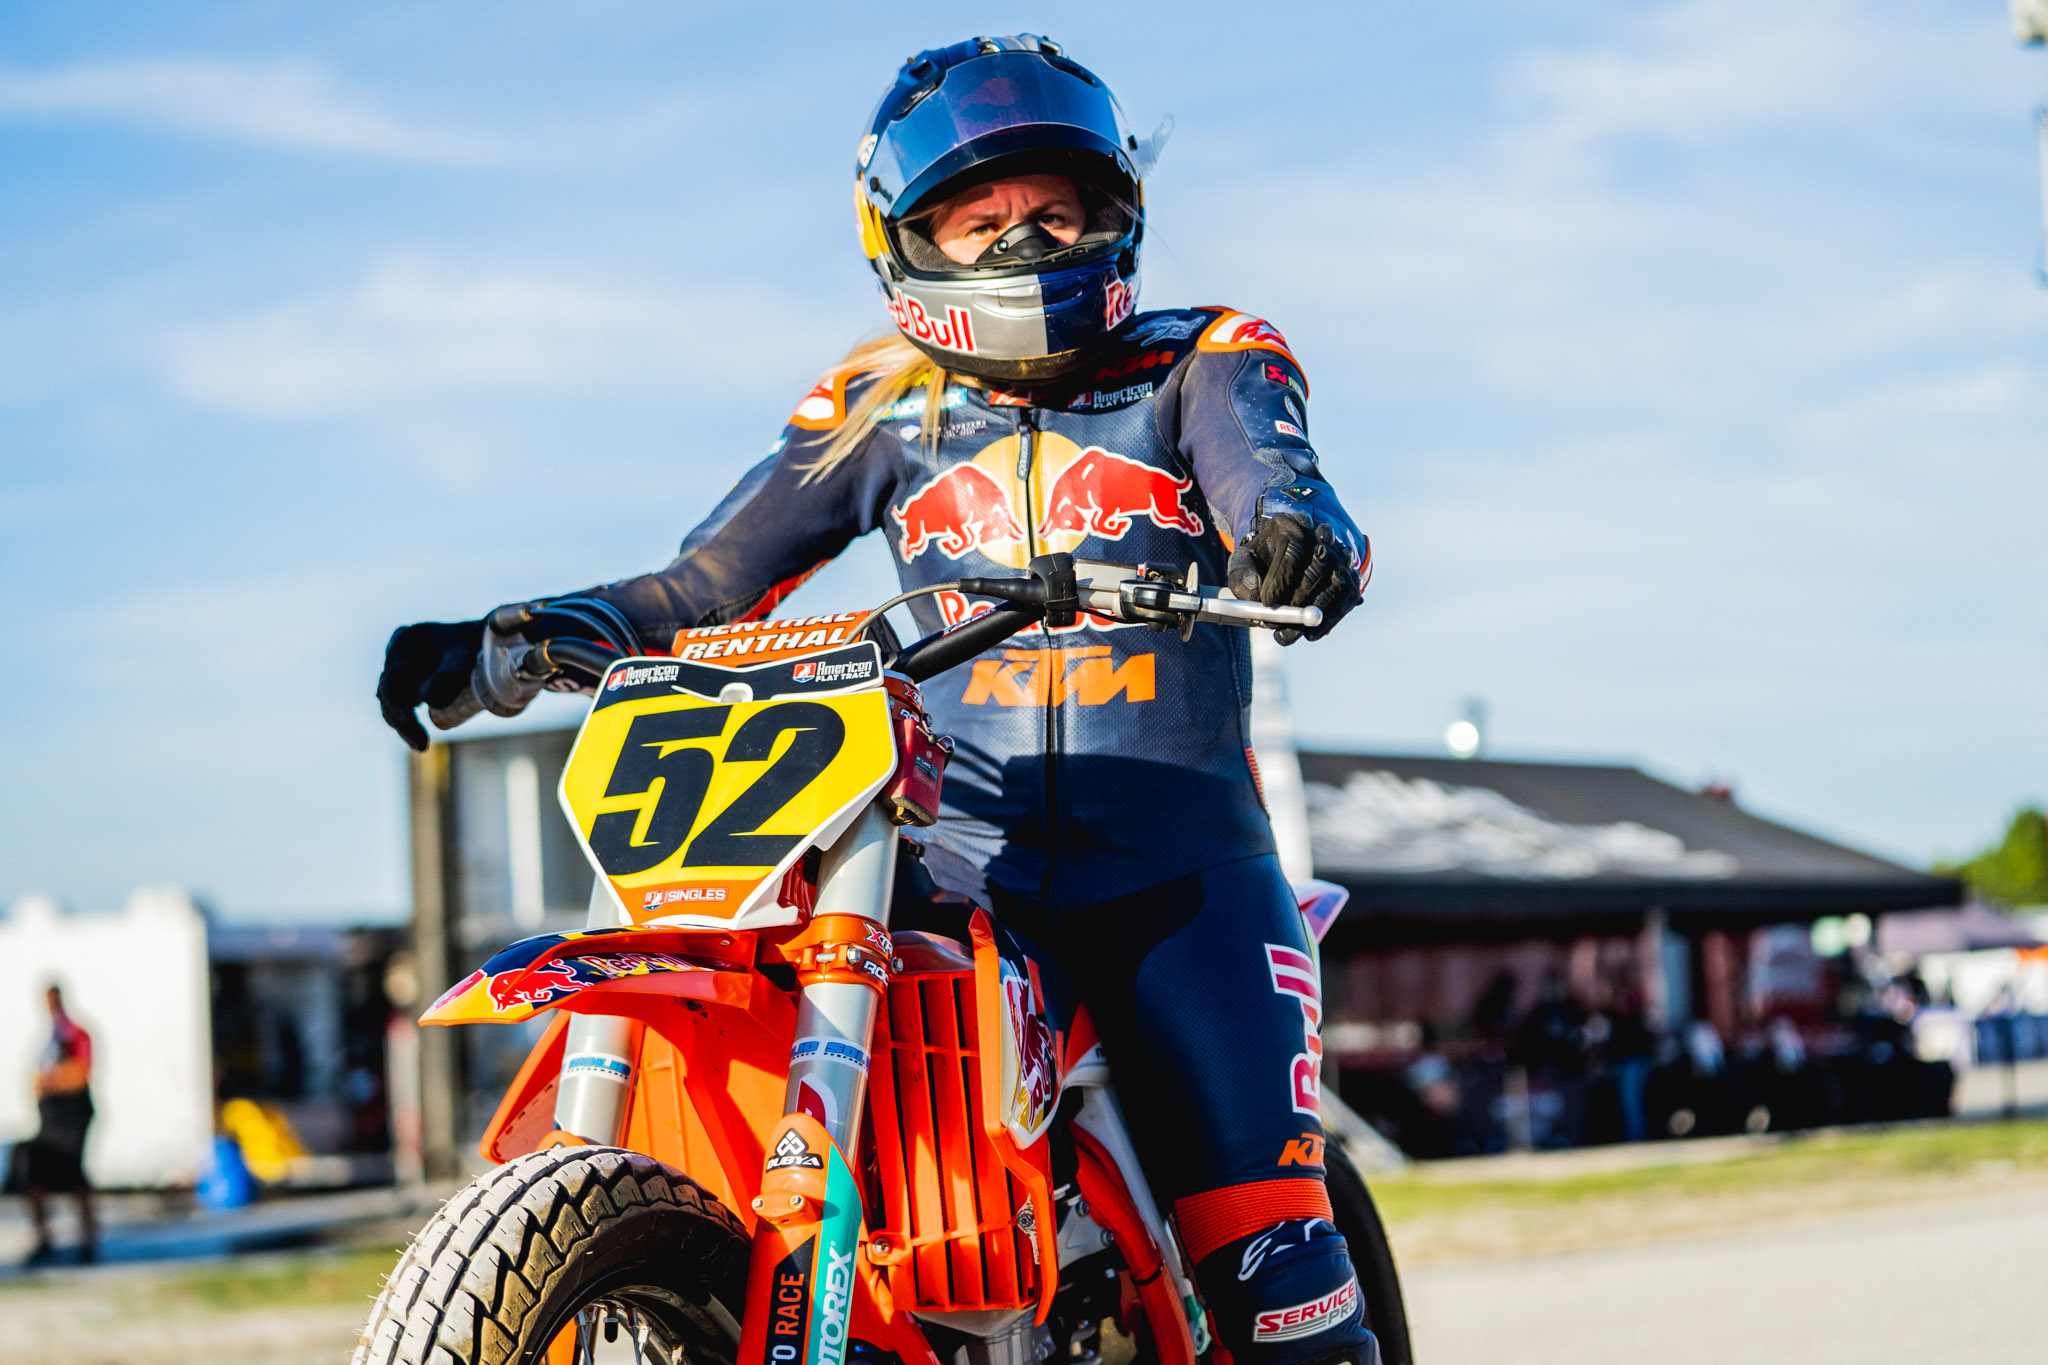 American Flat Track racer Shayna Texter at the indy Mile